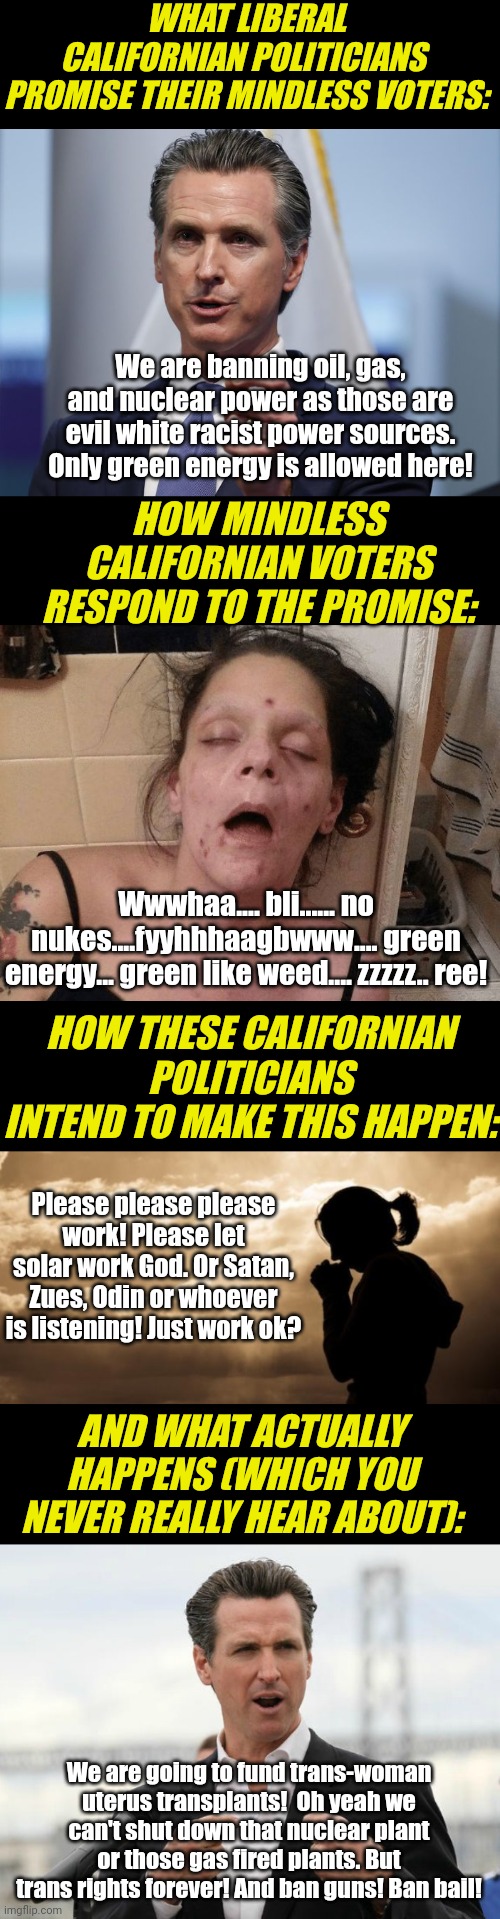 Oh silly California. Showing the universe what NOT to do again..... | WHAT LIBERAL CALIFORNIAN POLITICIANS  PROMISE THEIR MINDLESS VOTERS:; We are banning oil, gas, and nuclear power as those are evil white racist power sources. Only green energy is allowed here! HOW MINDLESS CALIFORNIAN VOTERS RESPOND TO THE PROMISE:; Wwwhaa.... bli...... no nukes....fyyhhhaagbwww.... green energy... green like weed.... zzzzz.. ree! HOW THESE CALIFORNIAN POLITICIANS INTEND TO MAKE THIS HAPPEN:; Please please please work! Please let solar work God. Or Satan, Zues, Odin or whoever is listening! Just work ok? AND WHAT ACTUALLY HAPPENS (WHICH YOU NEVER REALLY HEAR ABOUT):; We are going to fund trans-woman uterus transplants!  Oh yeah we can't shut down that nuclear plant or those gas fired plants. But trans rights forever! And ban guns! Ban bail! | image tagged in gavin newsom shelter in place order,drug addict,woman praying,liberals,task failed successfully,power | made w/ Imgflip meme maker